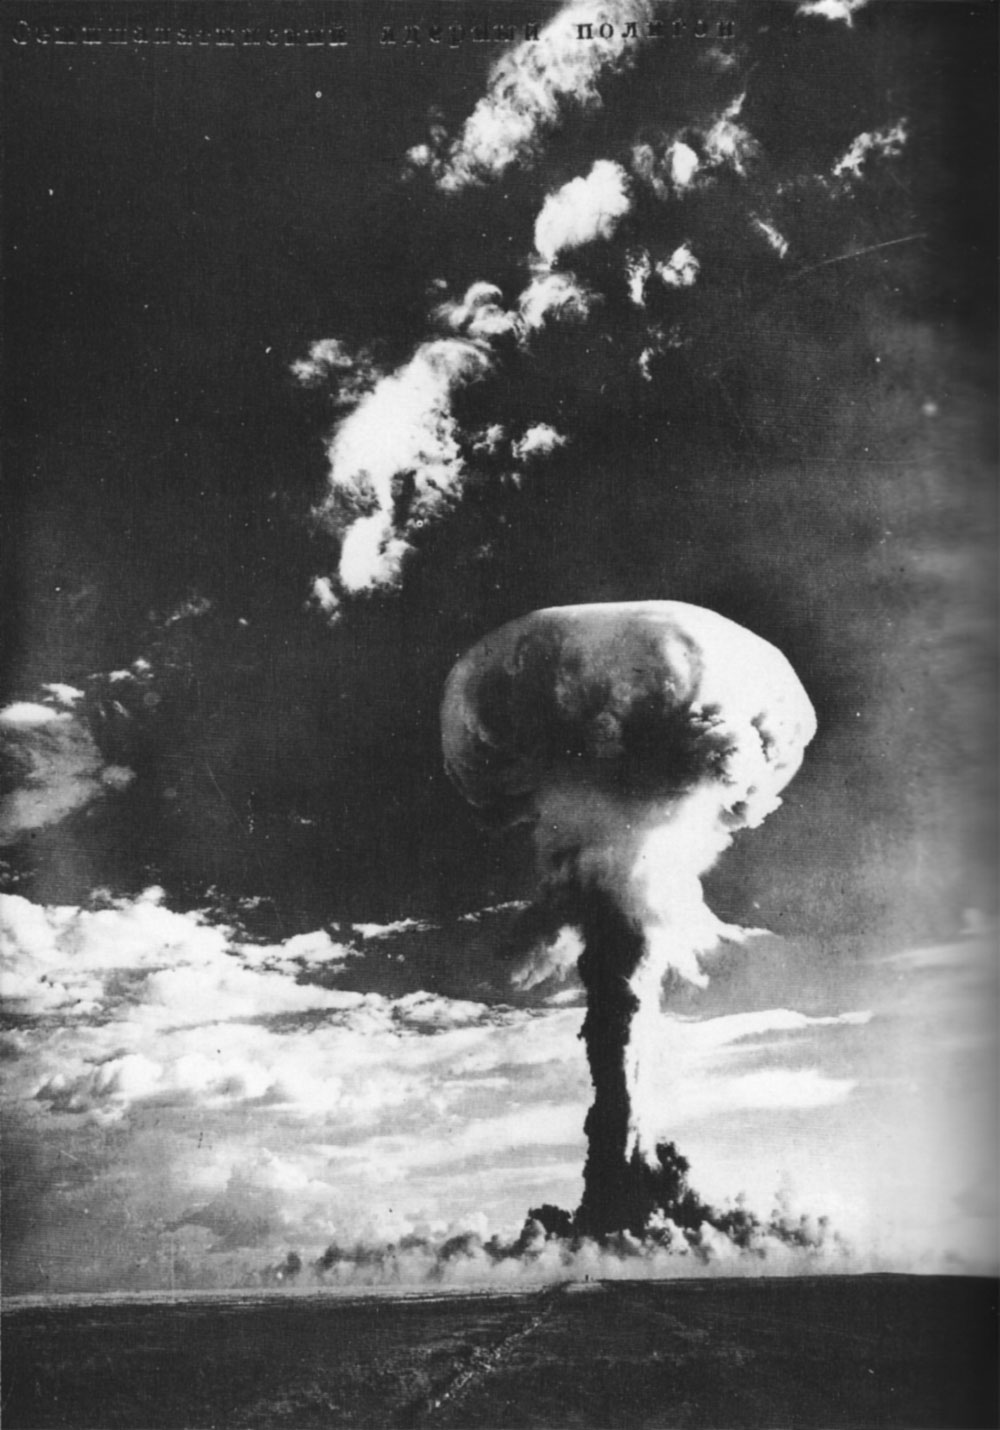 The mushroom cloud from the Soviet's first hydrogen bomb